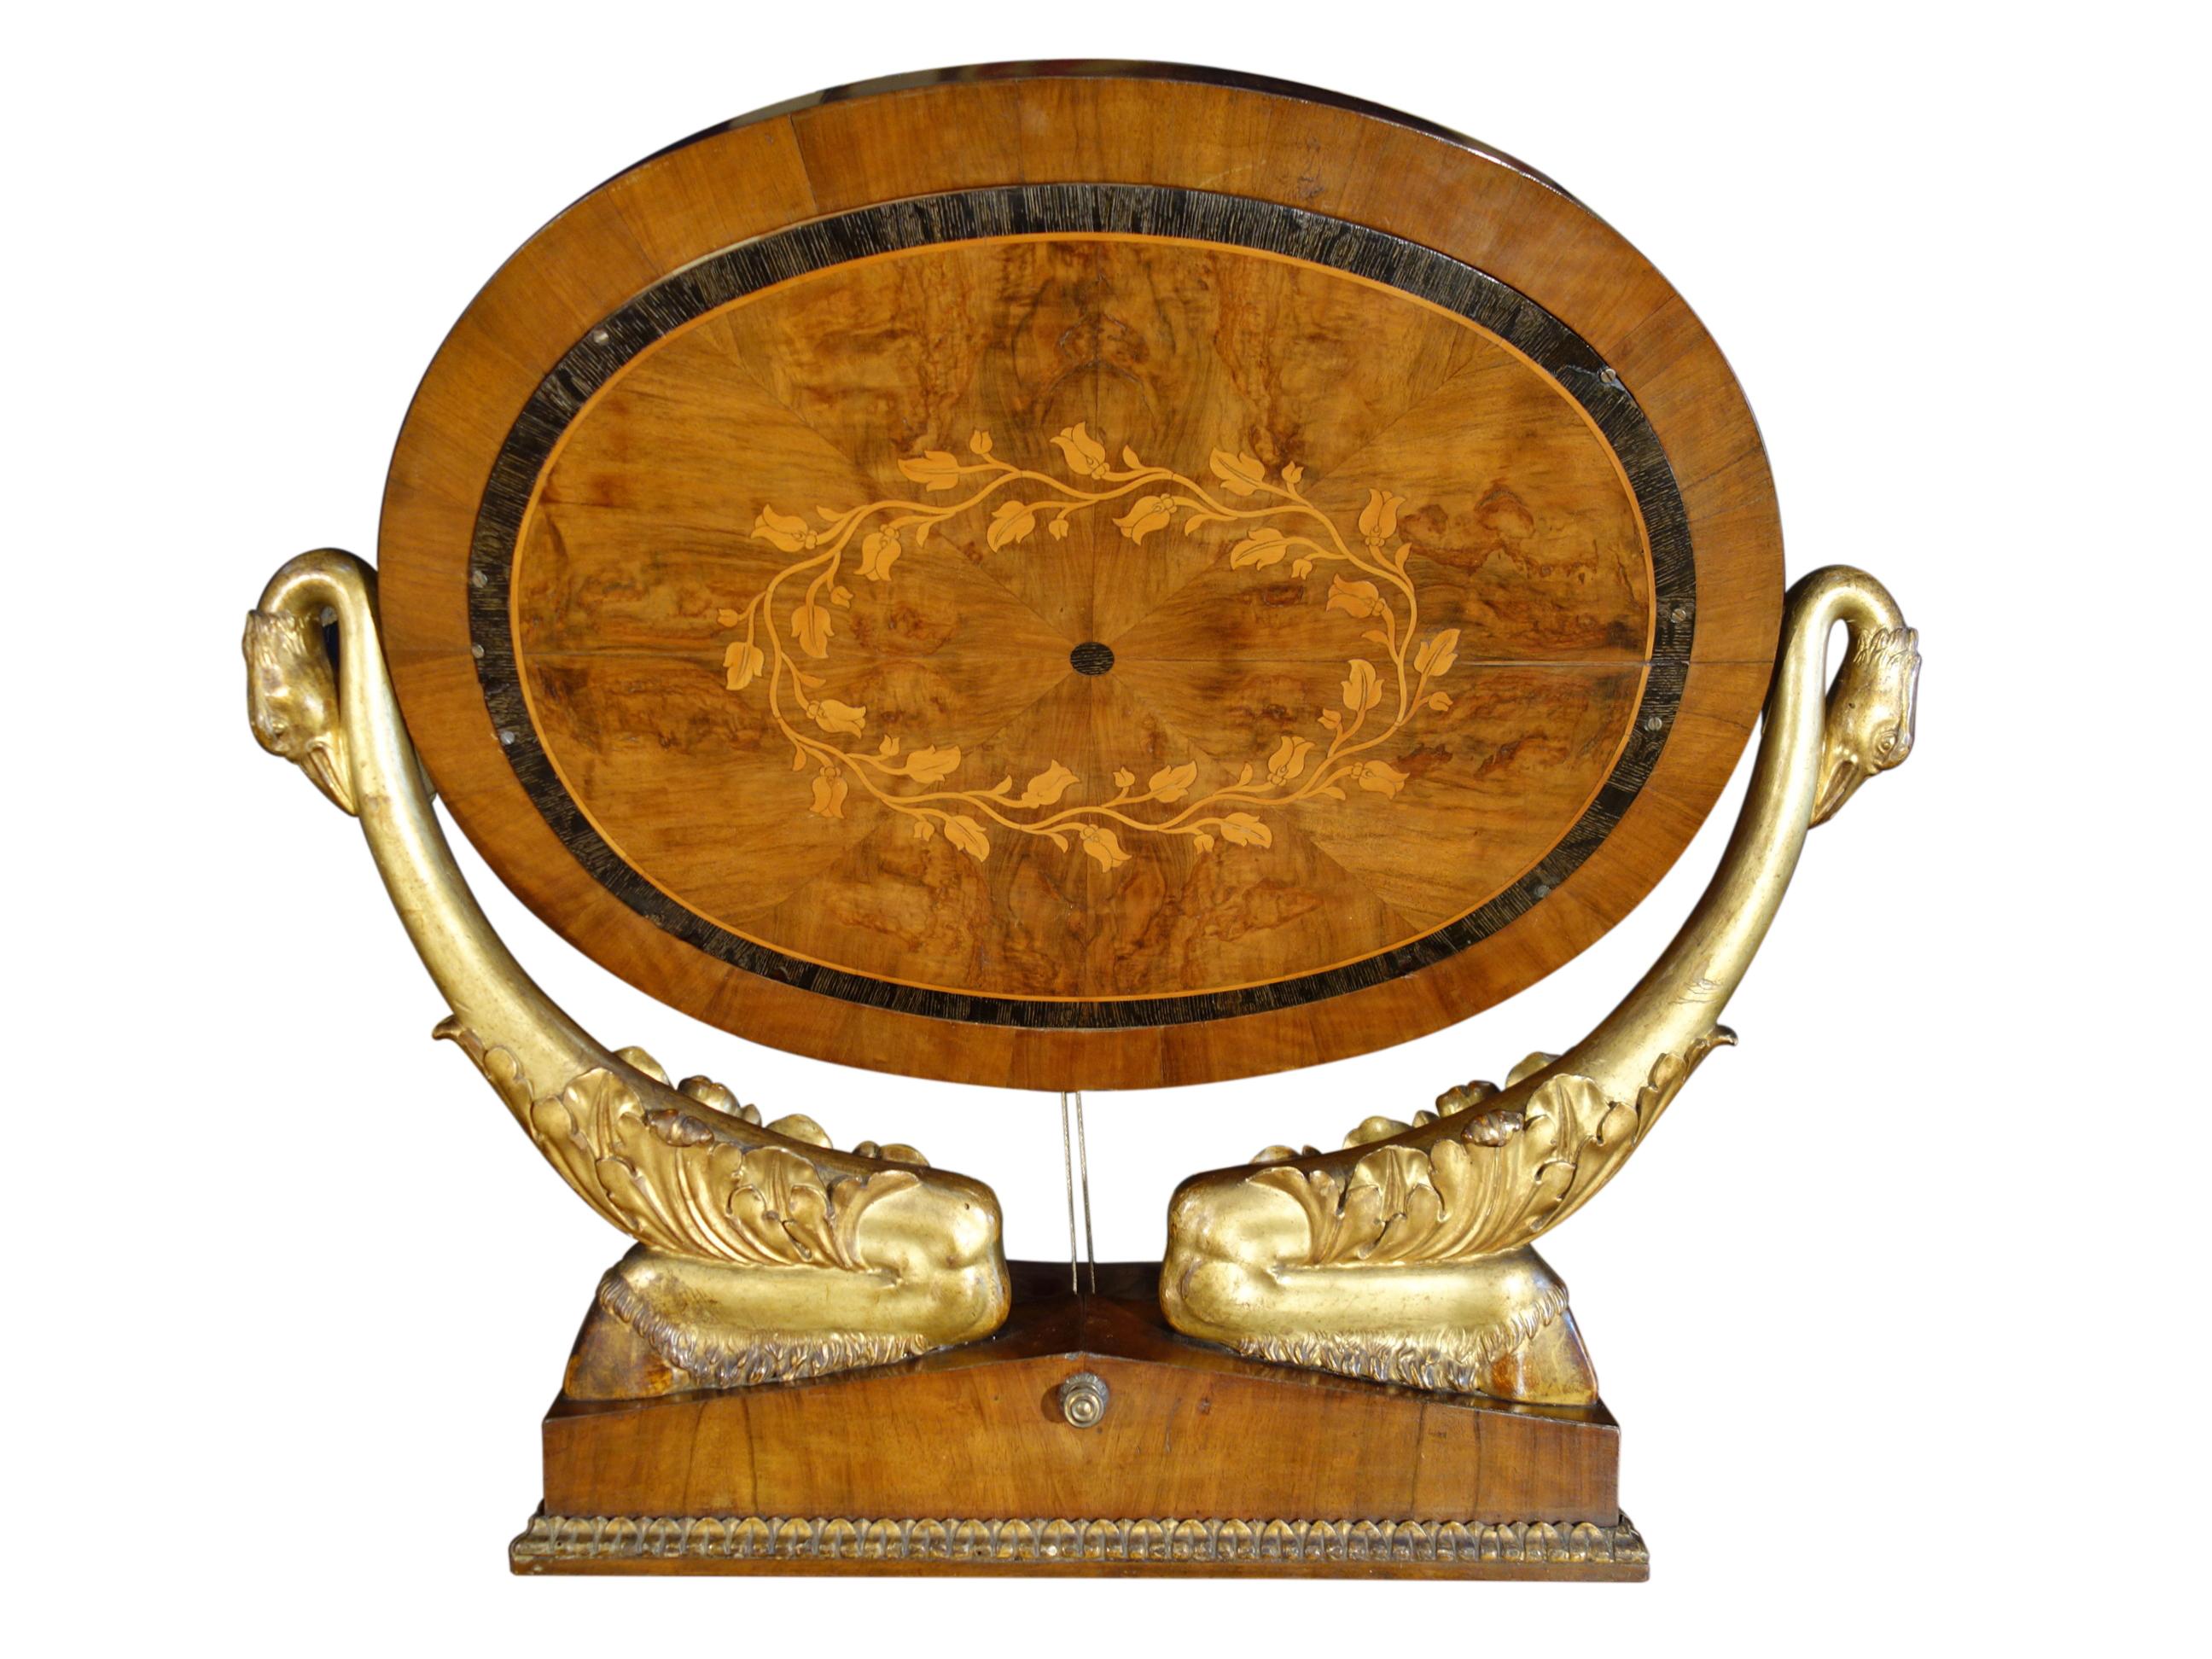 Italian Empire Walnut Psyche Table Mirror with Gold Gilt Swans and Ebony Inlay For Sale 1